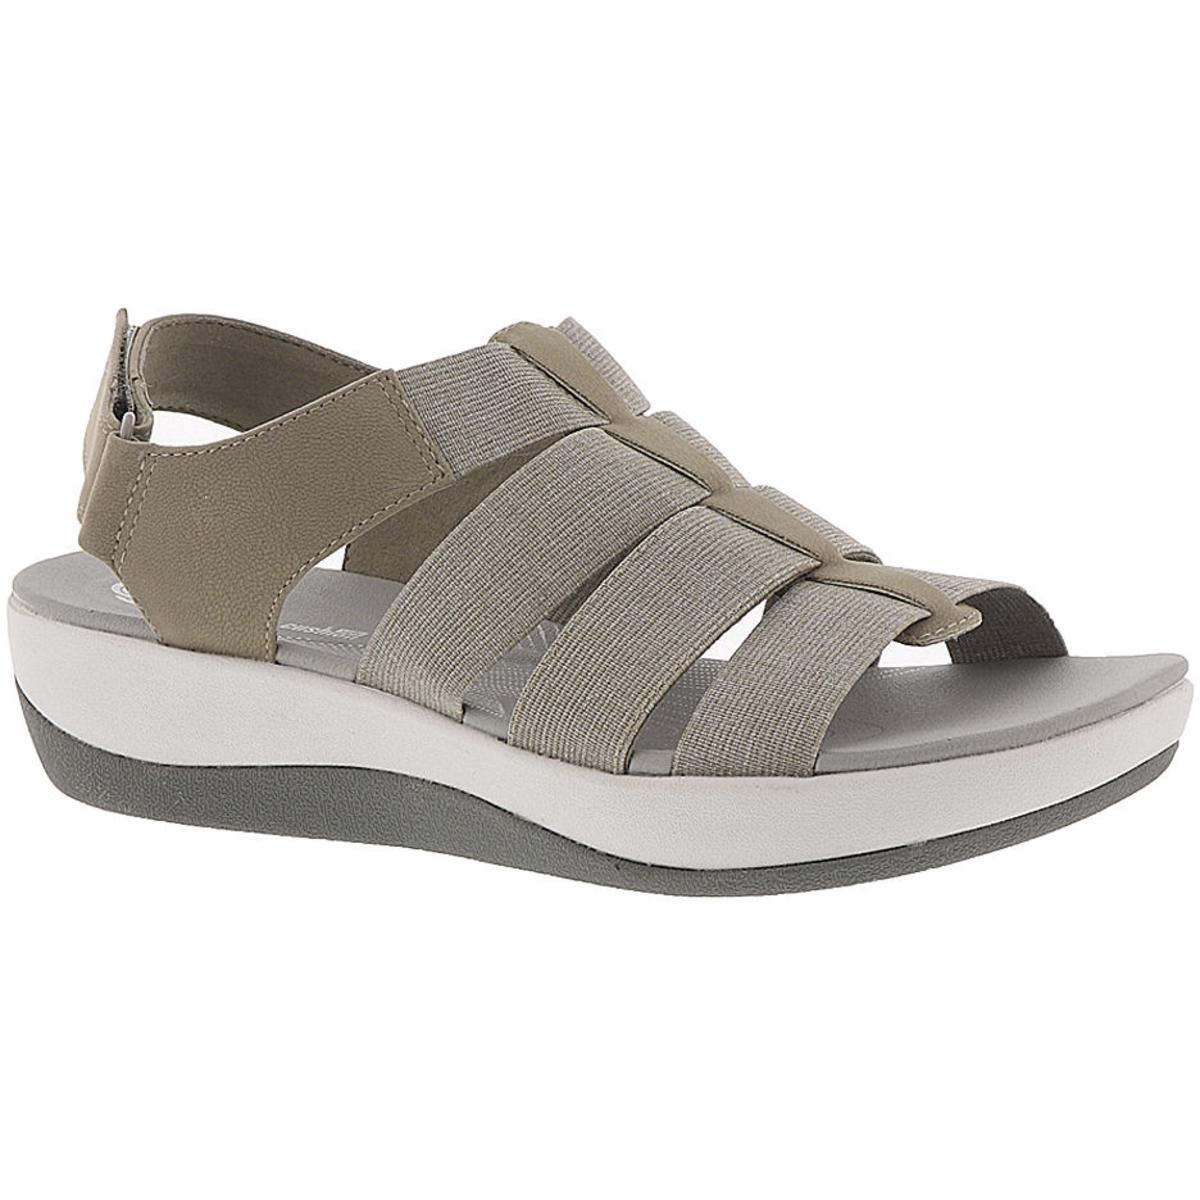 Cloudsteppers by Clarks Womens Arla Shaylie Tan Slingback Sandals BHFO ...